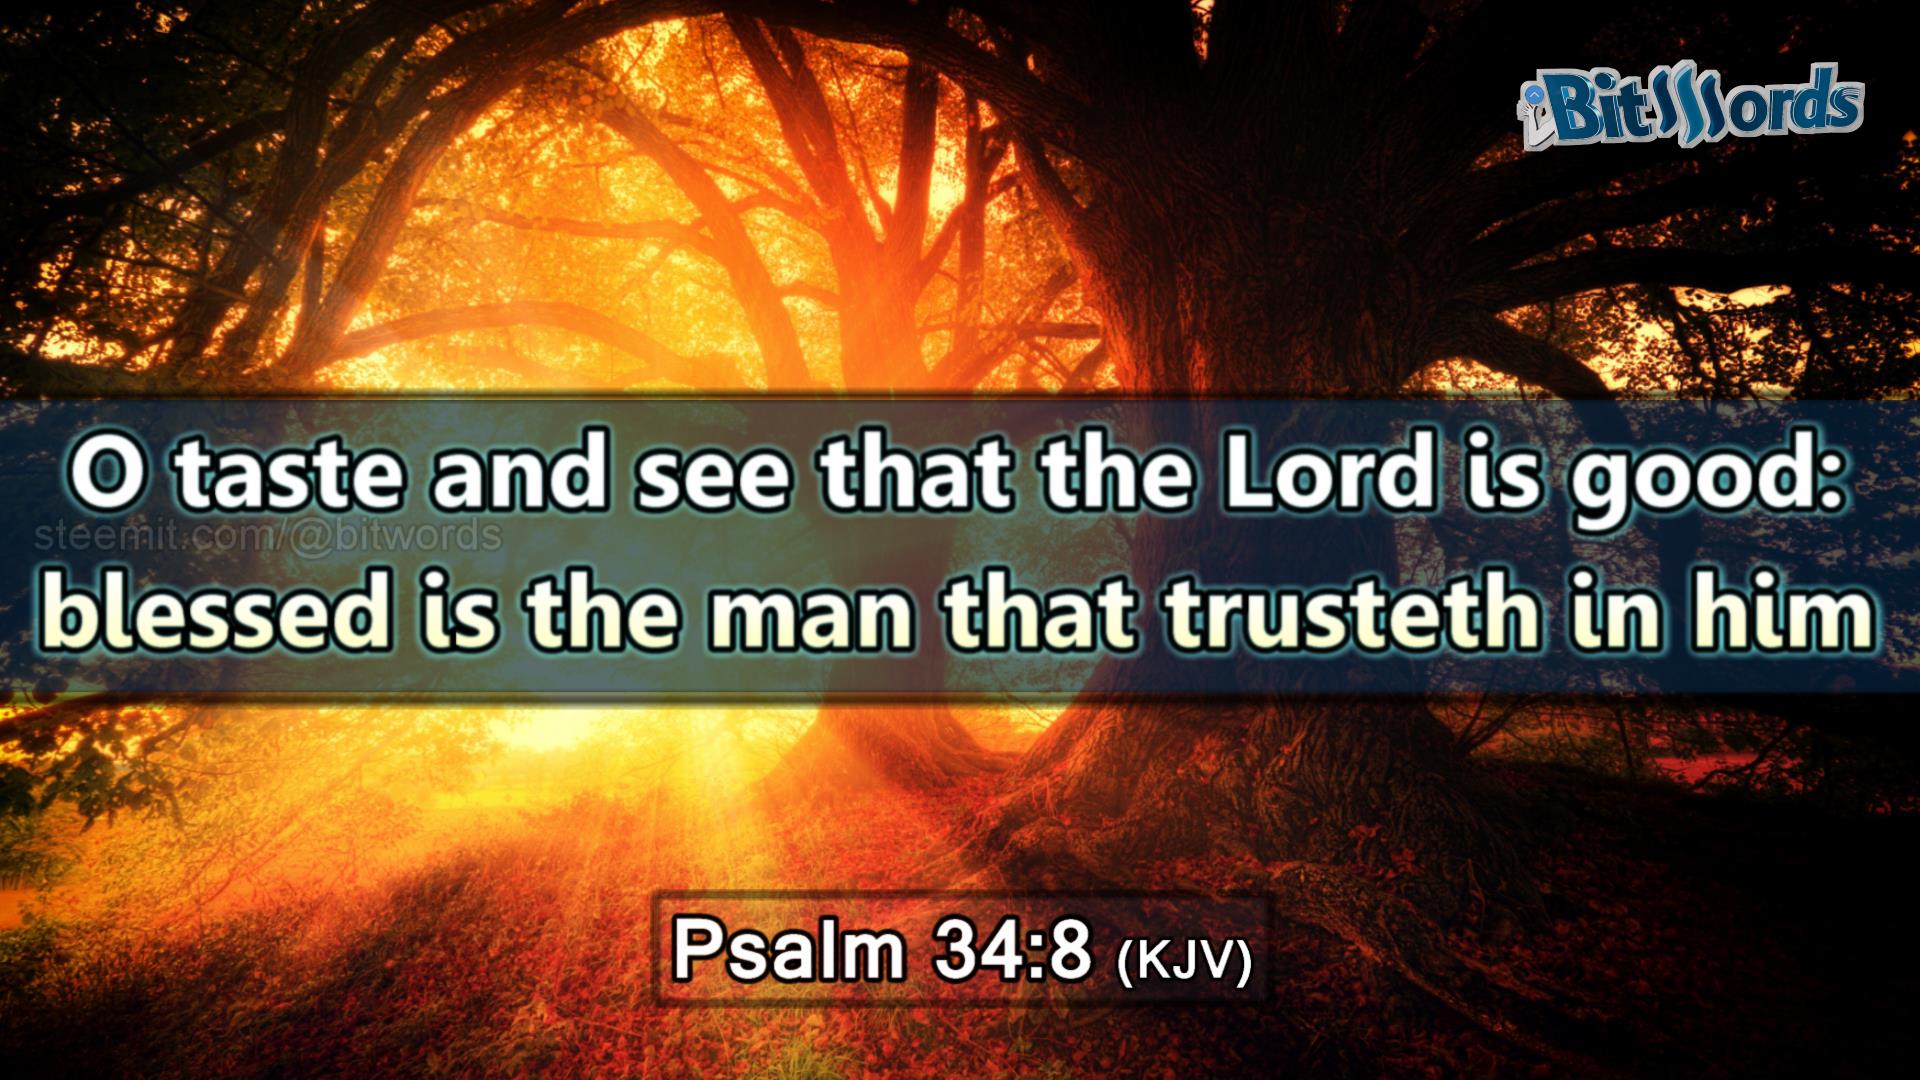 bitwords steemit bible verse of the day psalms 34 8O taste and see that the Lord is good blessed is the man that trusteth in him.jpg